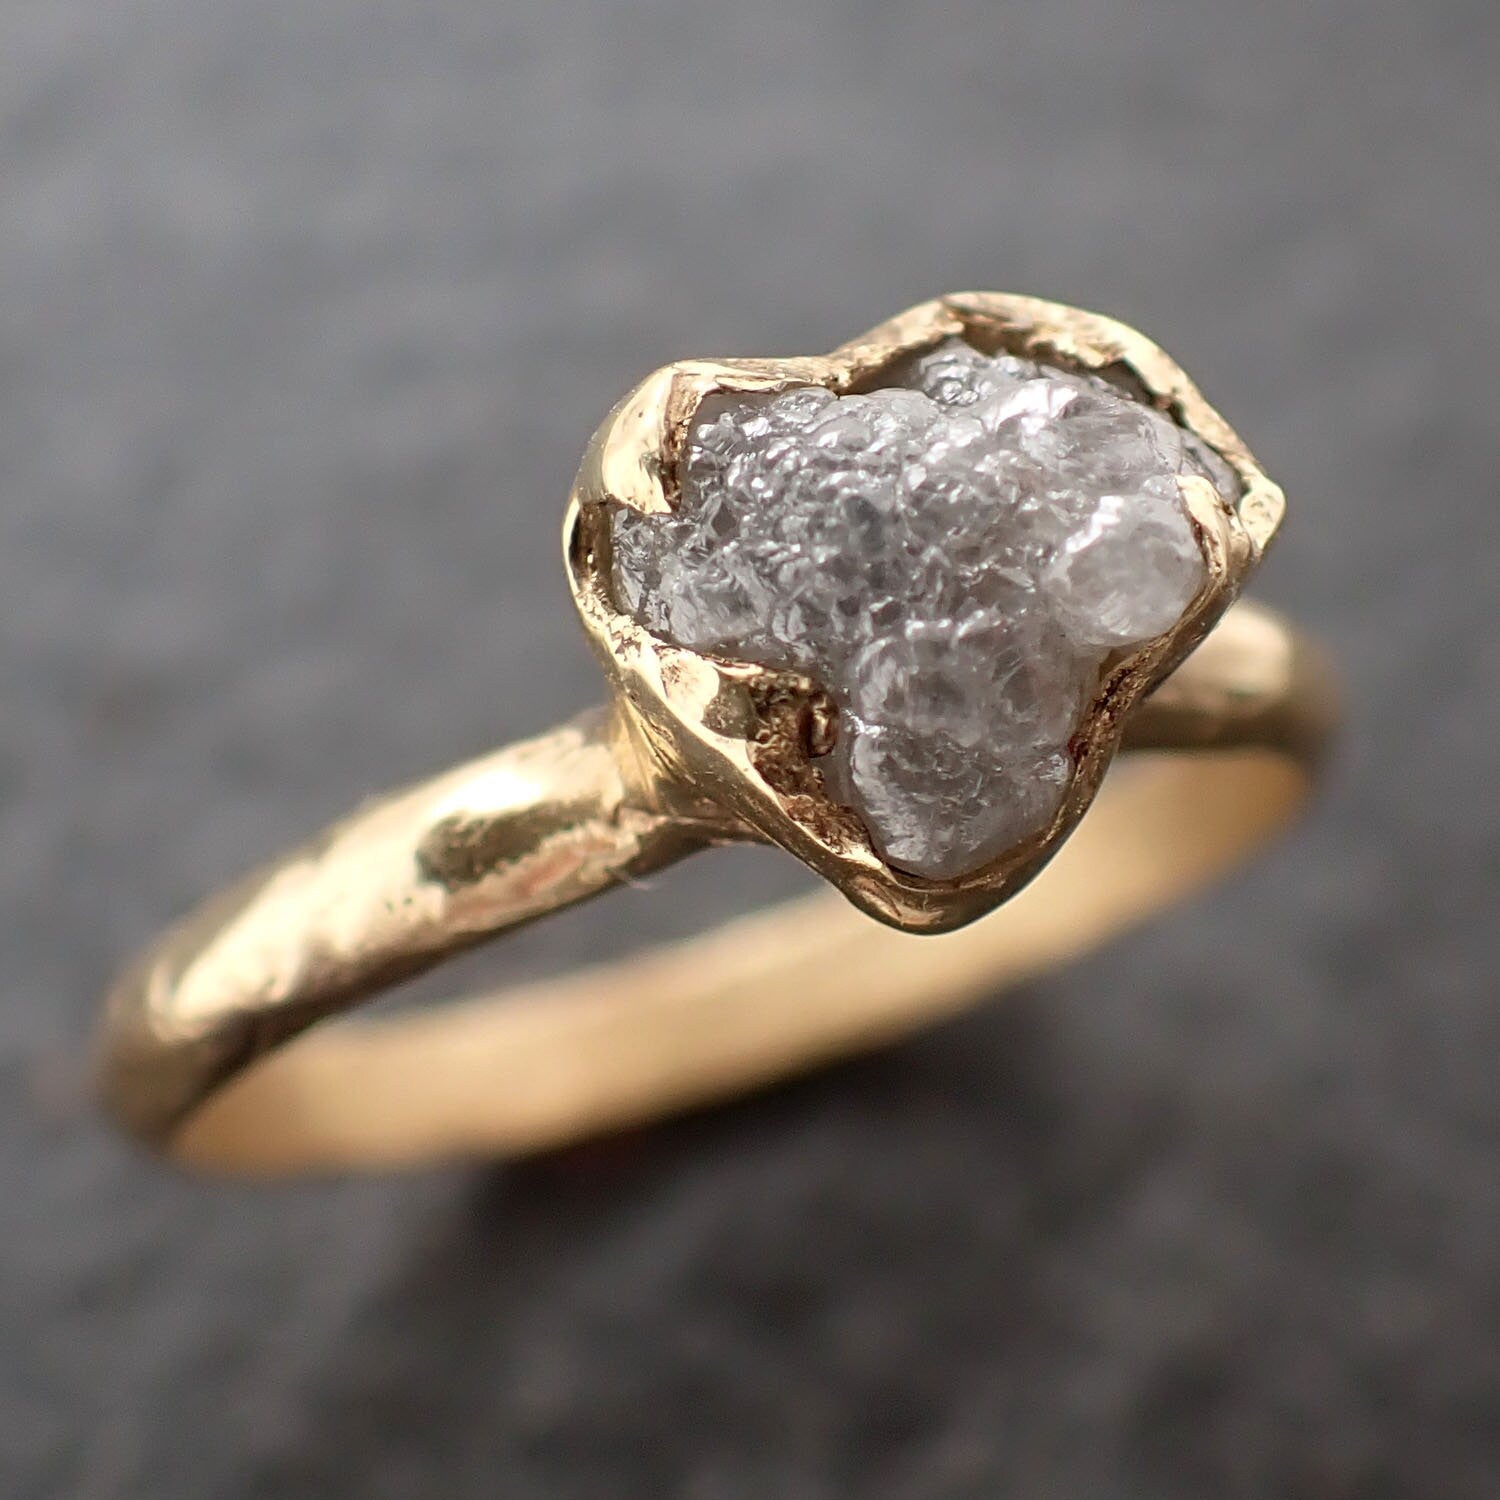 Raw Rough UnCut Diamond Engagement Ring Rough Diamond Solitaire Recycled 18k gold Conflict Free Diamond Wedding Promise byAngeline 3085